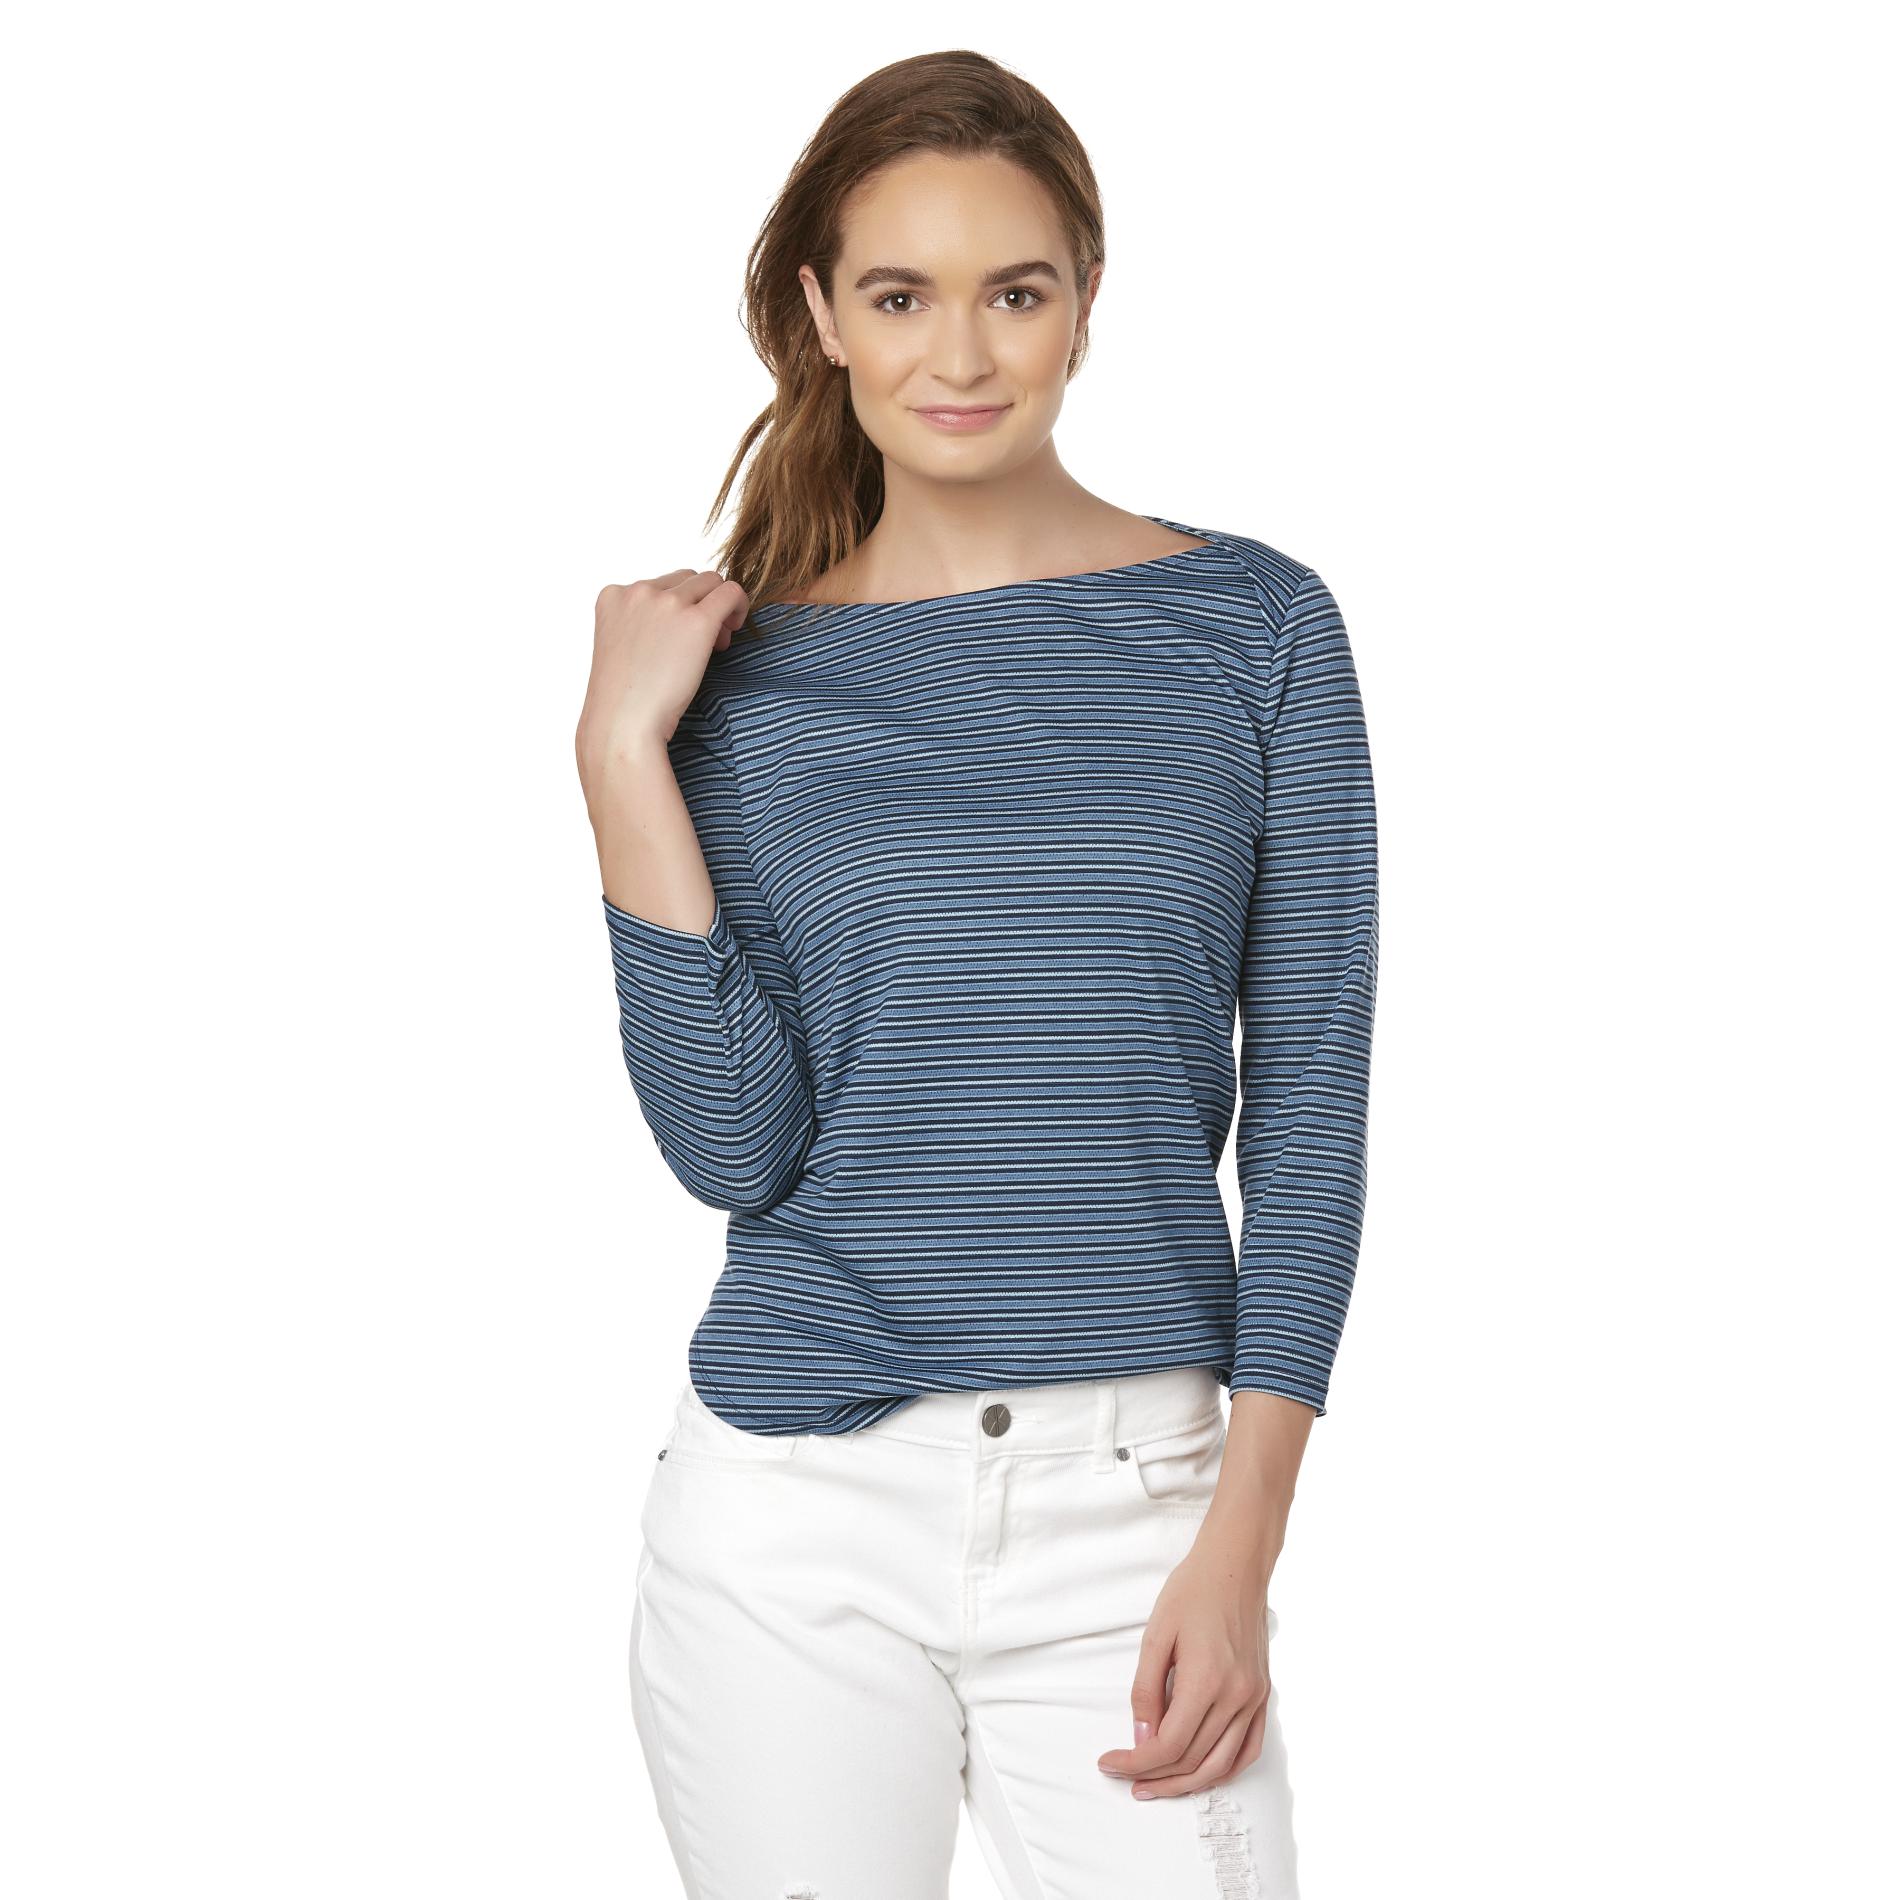 Simply Styled Women's Boat Neck Top - Striped